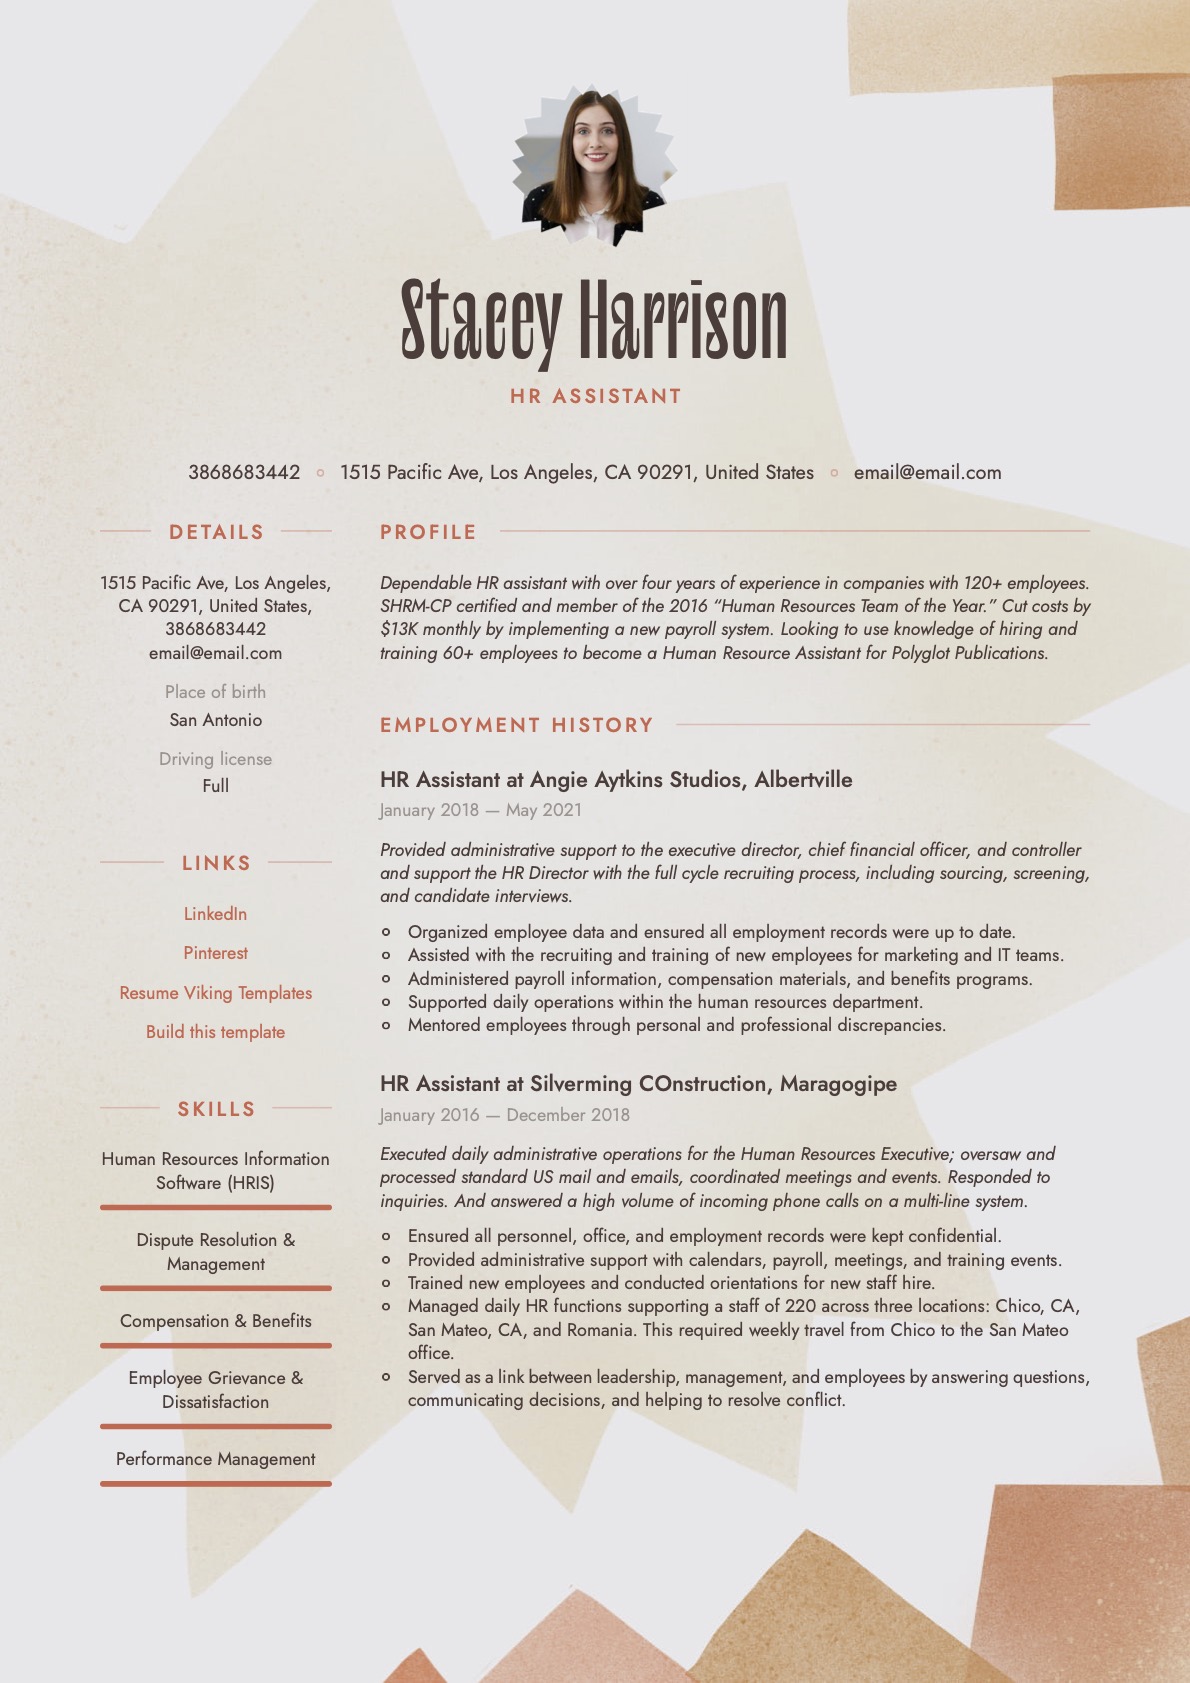 Human Resource Assistant Resume